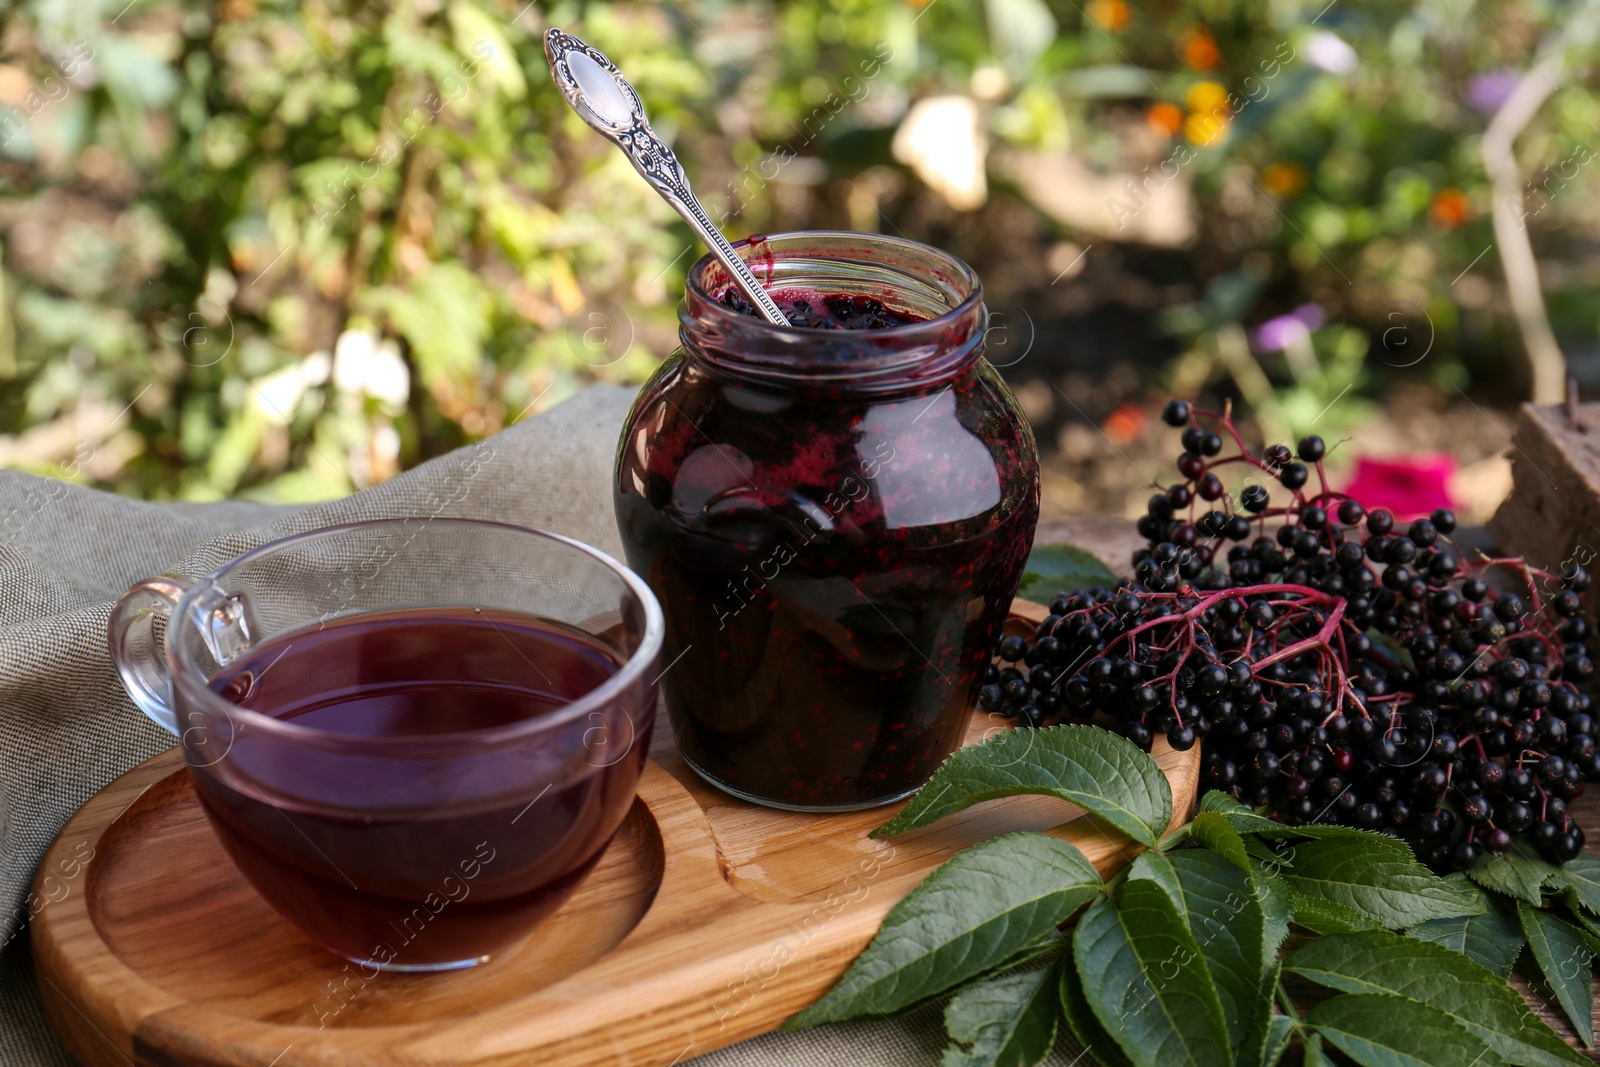 Photo of Elderberry jam, glass cup of tea and Sambucus berries on table outdoors